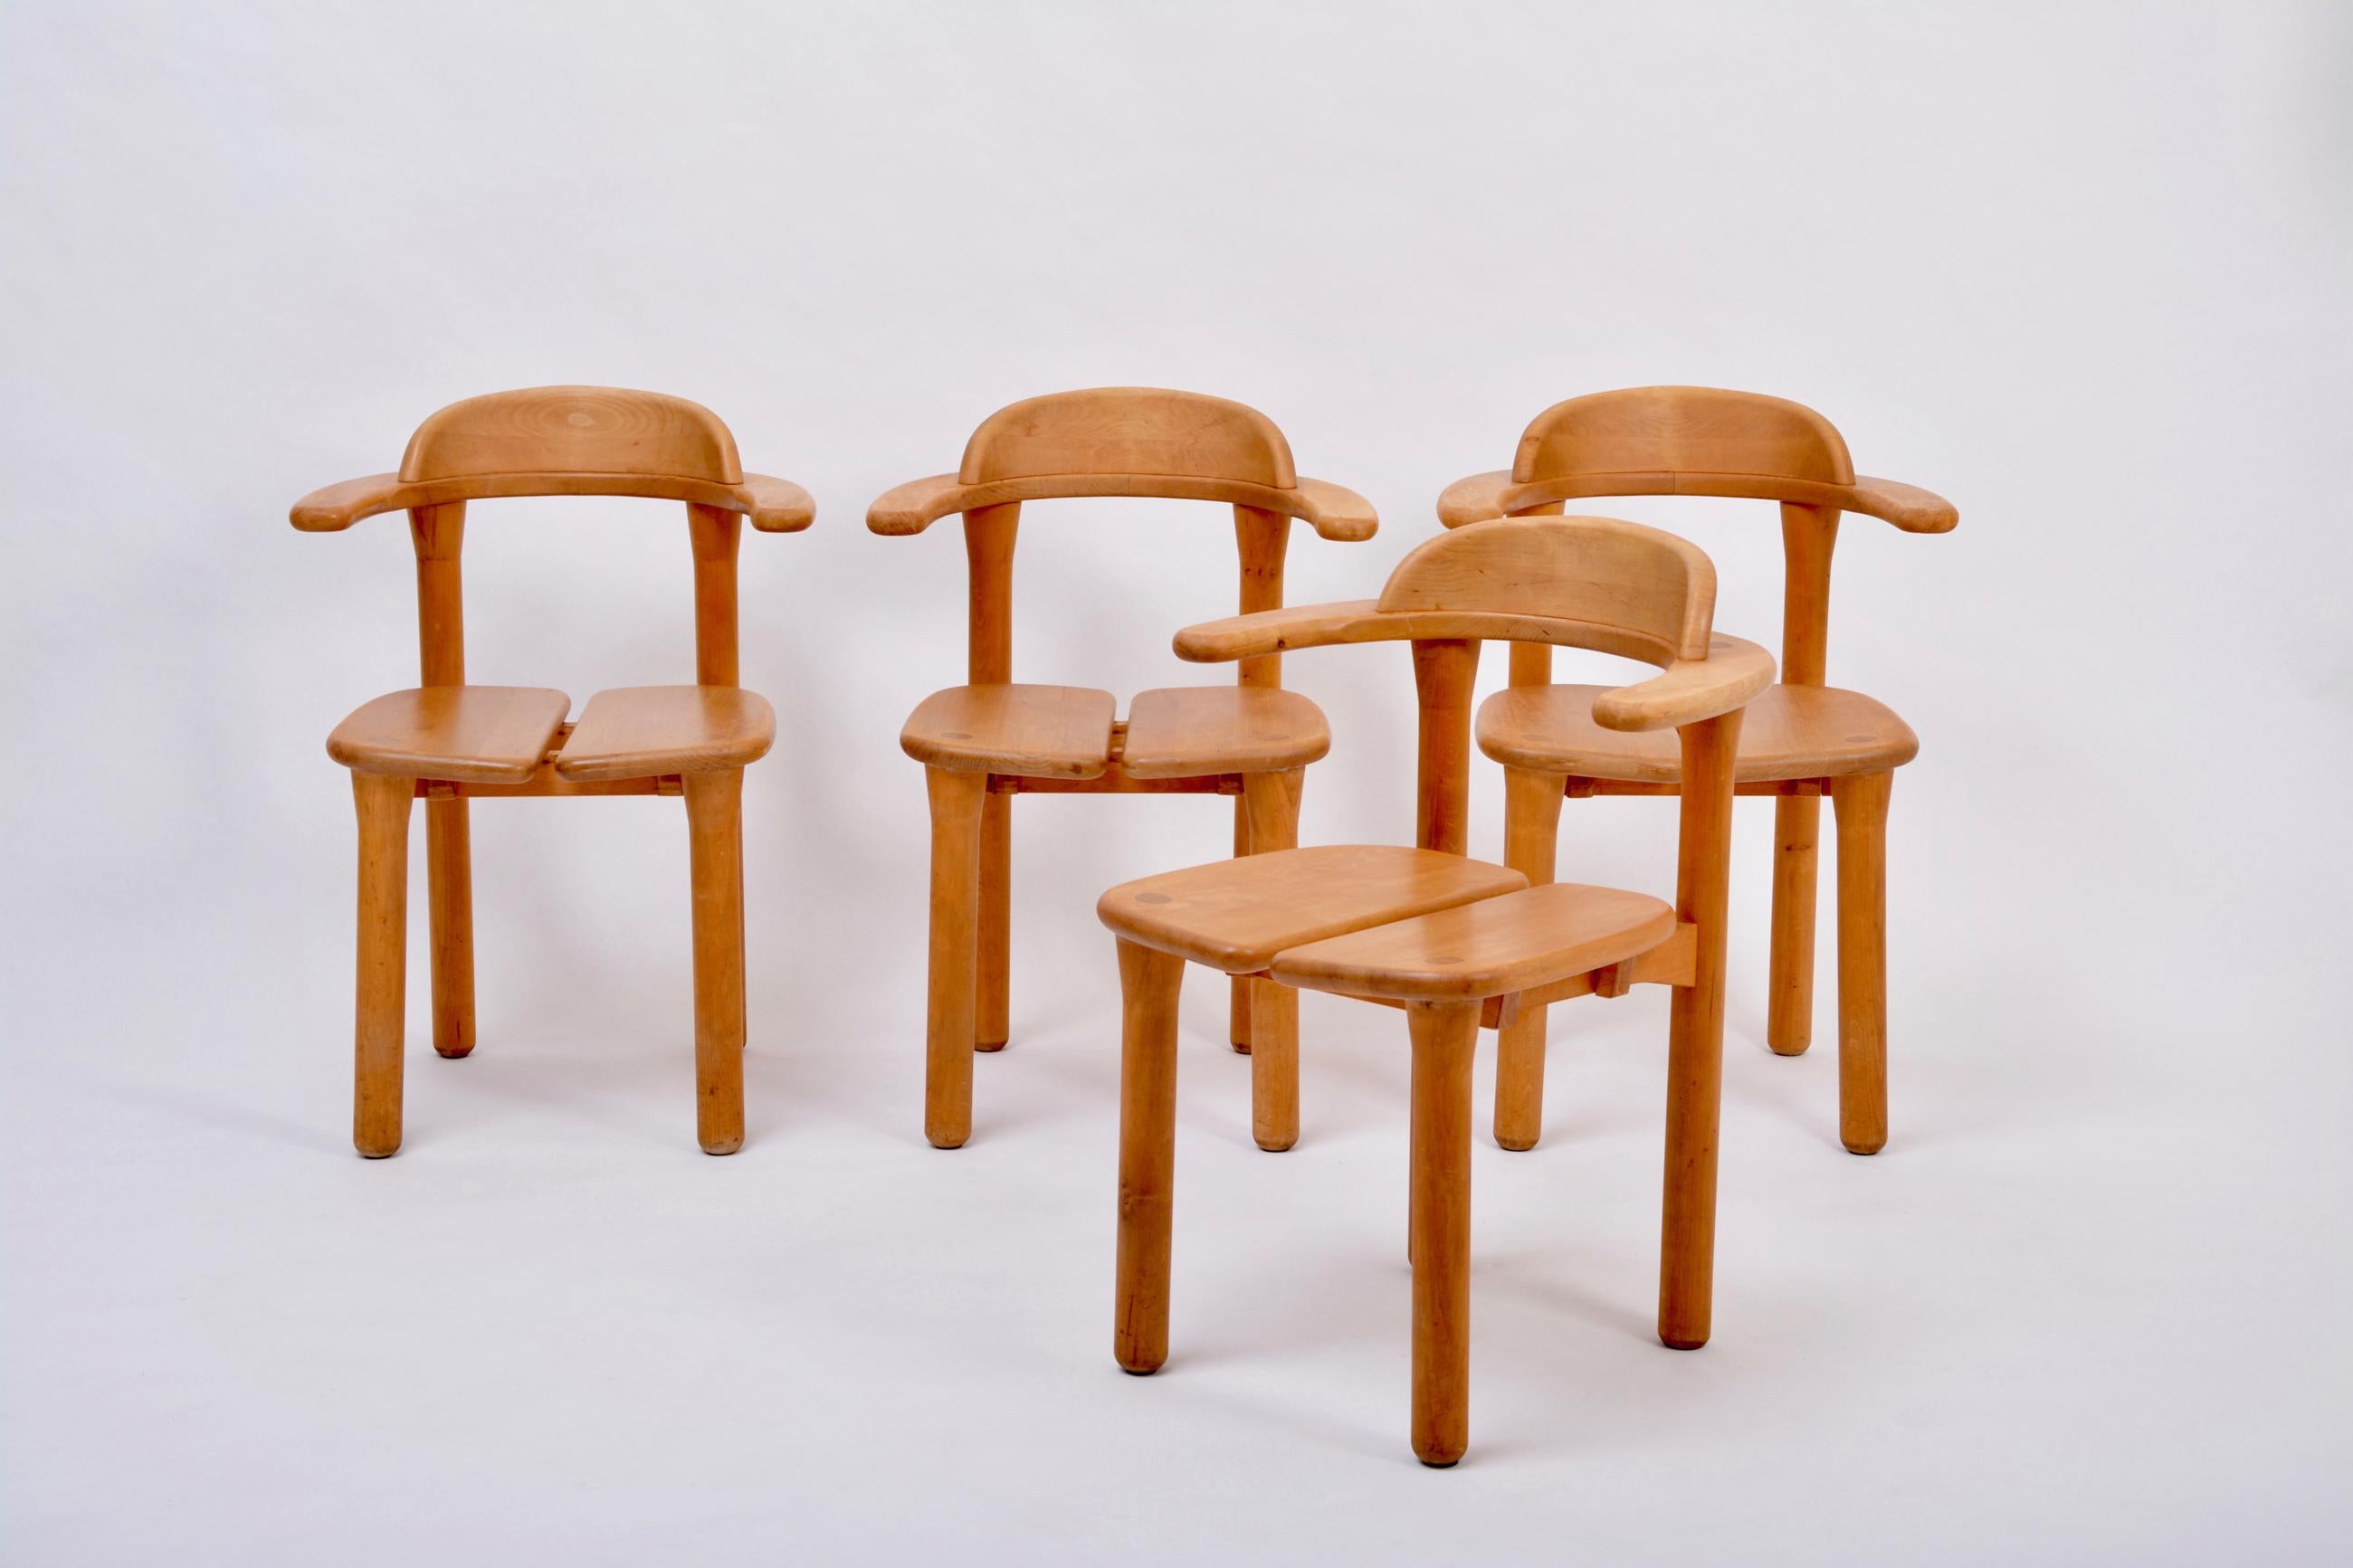 Set of four rustic Scandinavian Mid-Century Modern dining chairs
The design of this set of four chairs reminds of Rainer Daumiller. Beautiful rustic look thanks to the solid beech wood, and the characterful design of the chairs with their sturdy